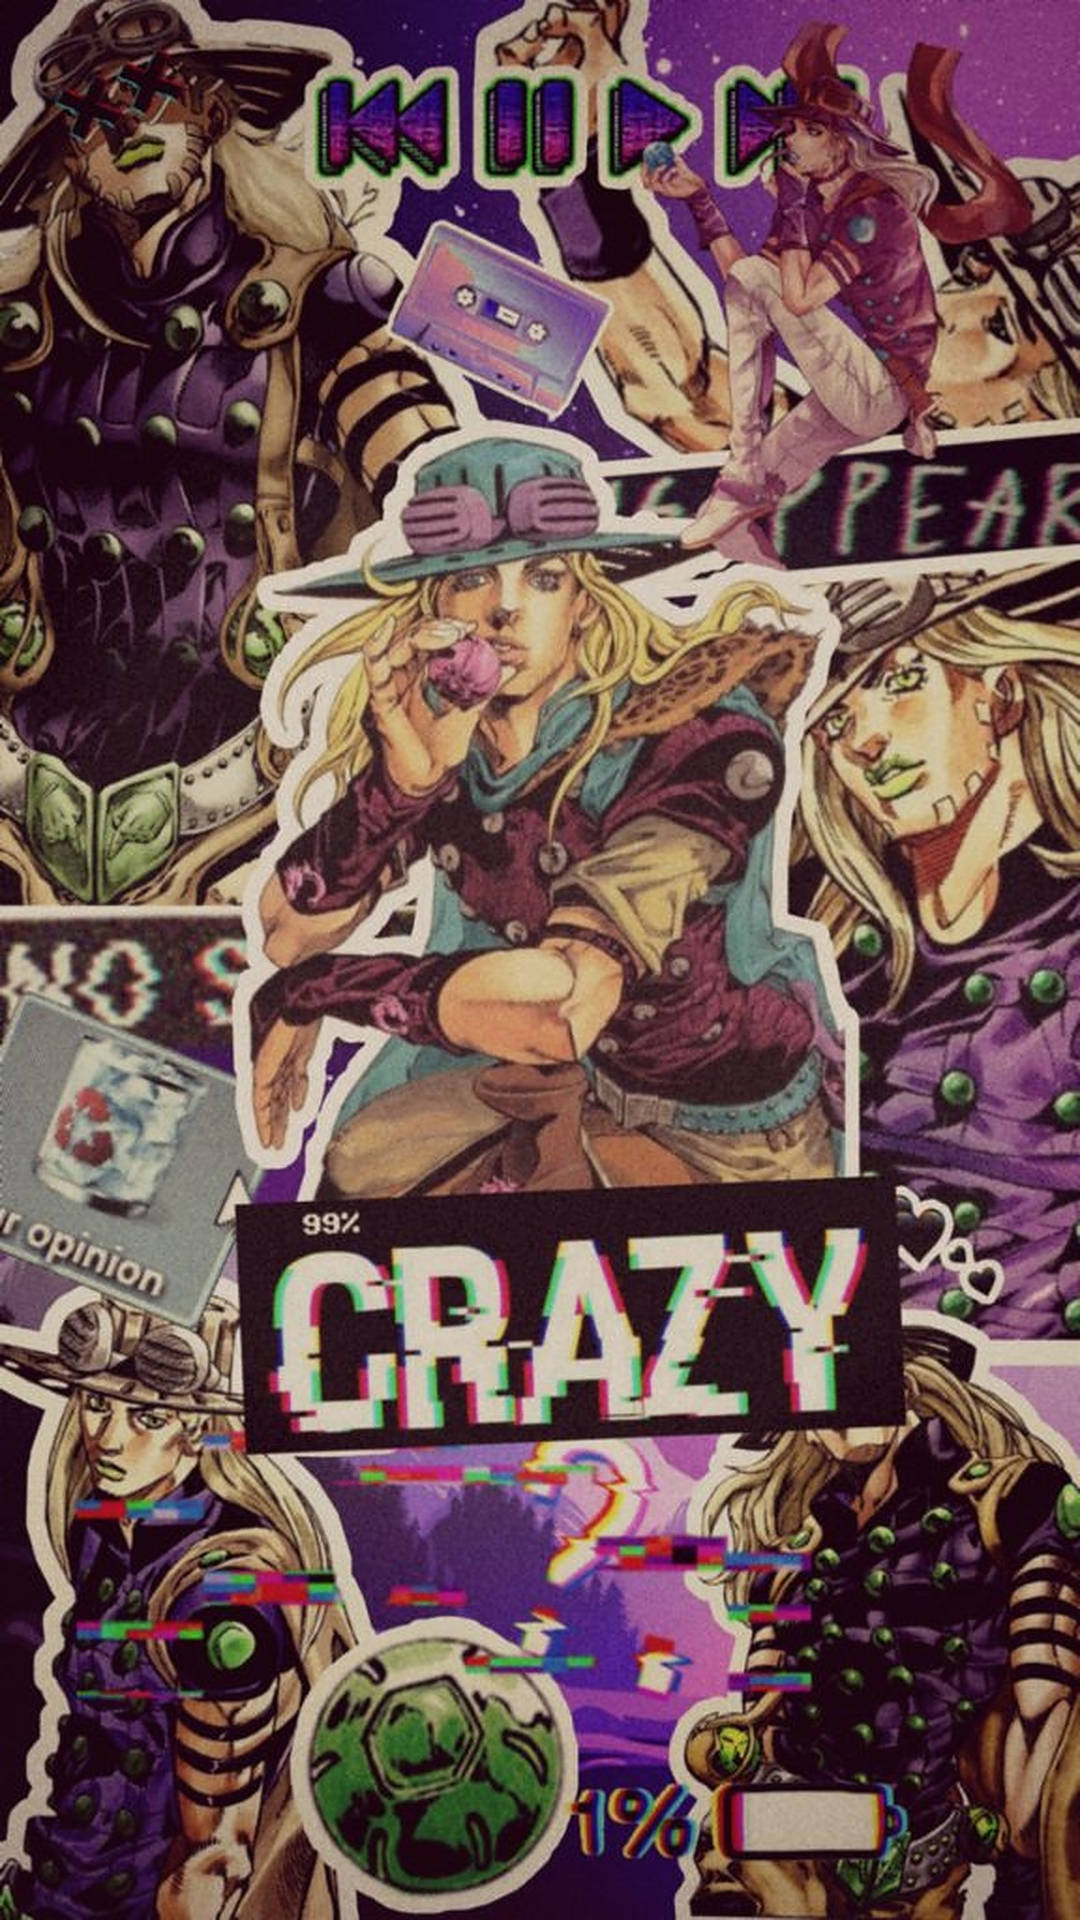 Wallpaper Hoe  Just an extra wallpaper I made while making Gyro